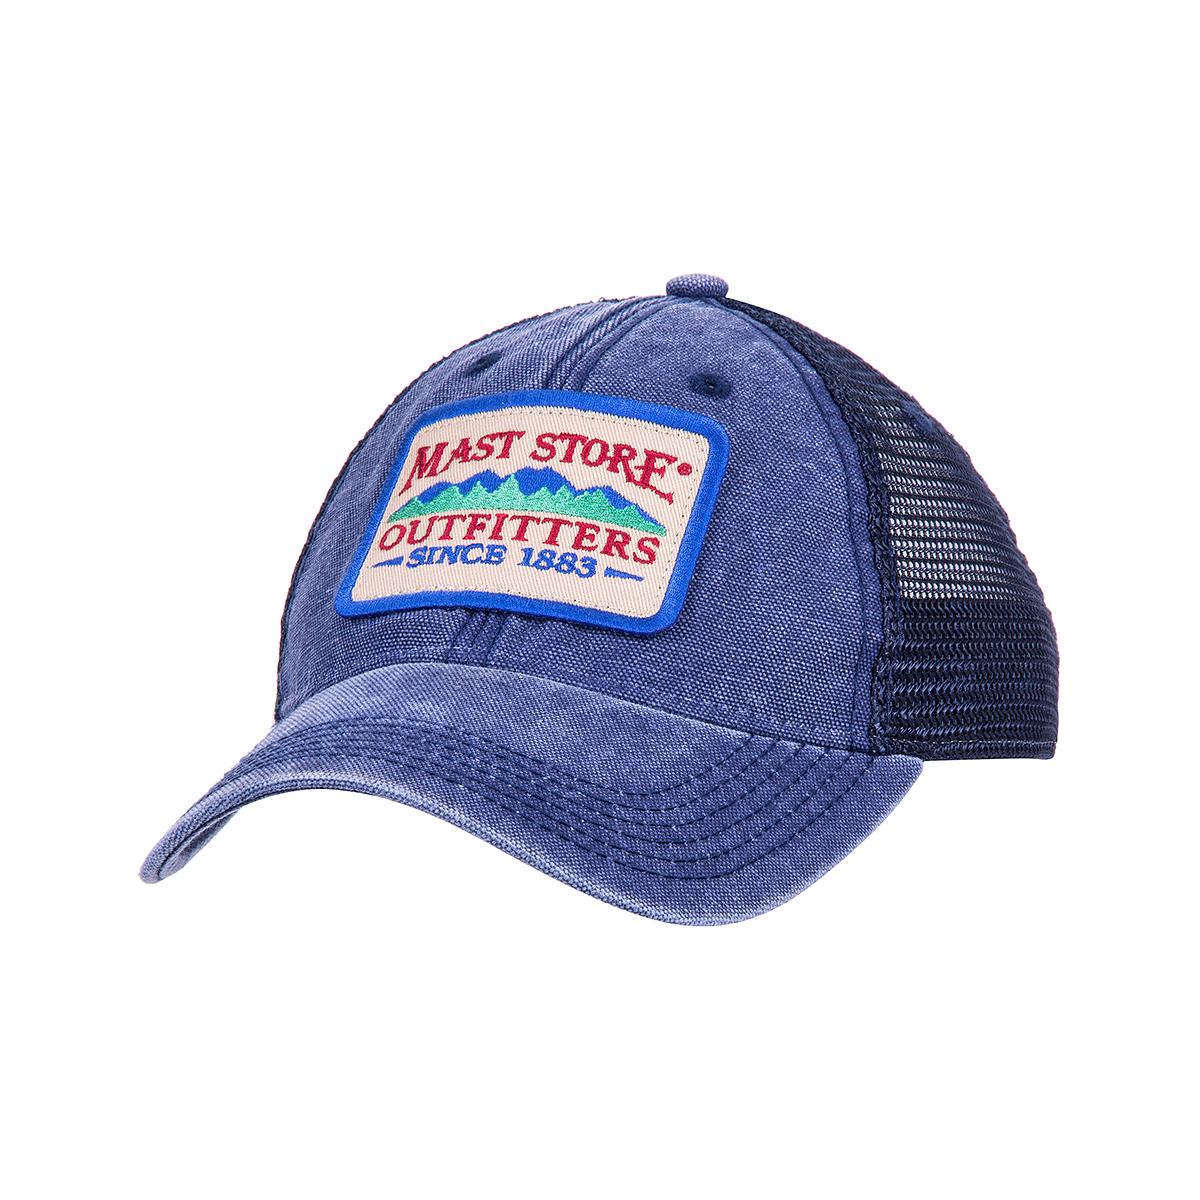 Patch Trucker Hat - Ice Cold Country Music